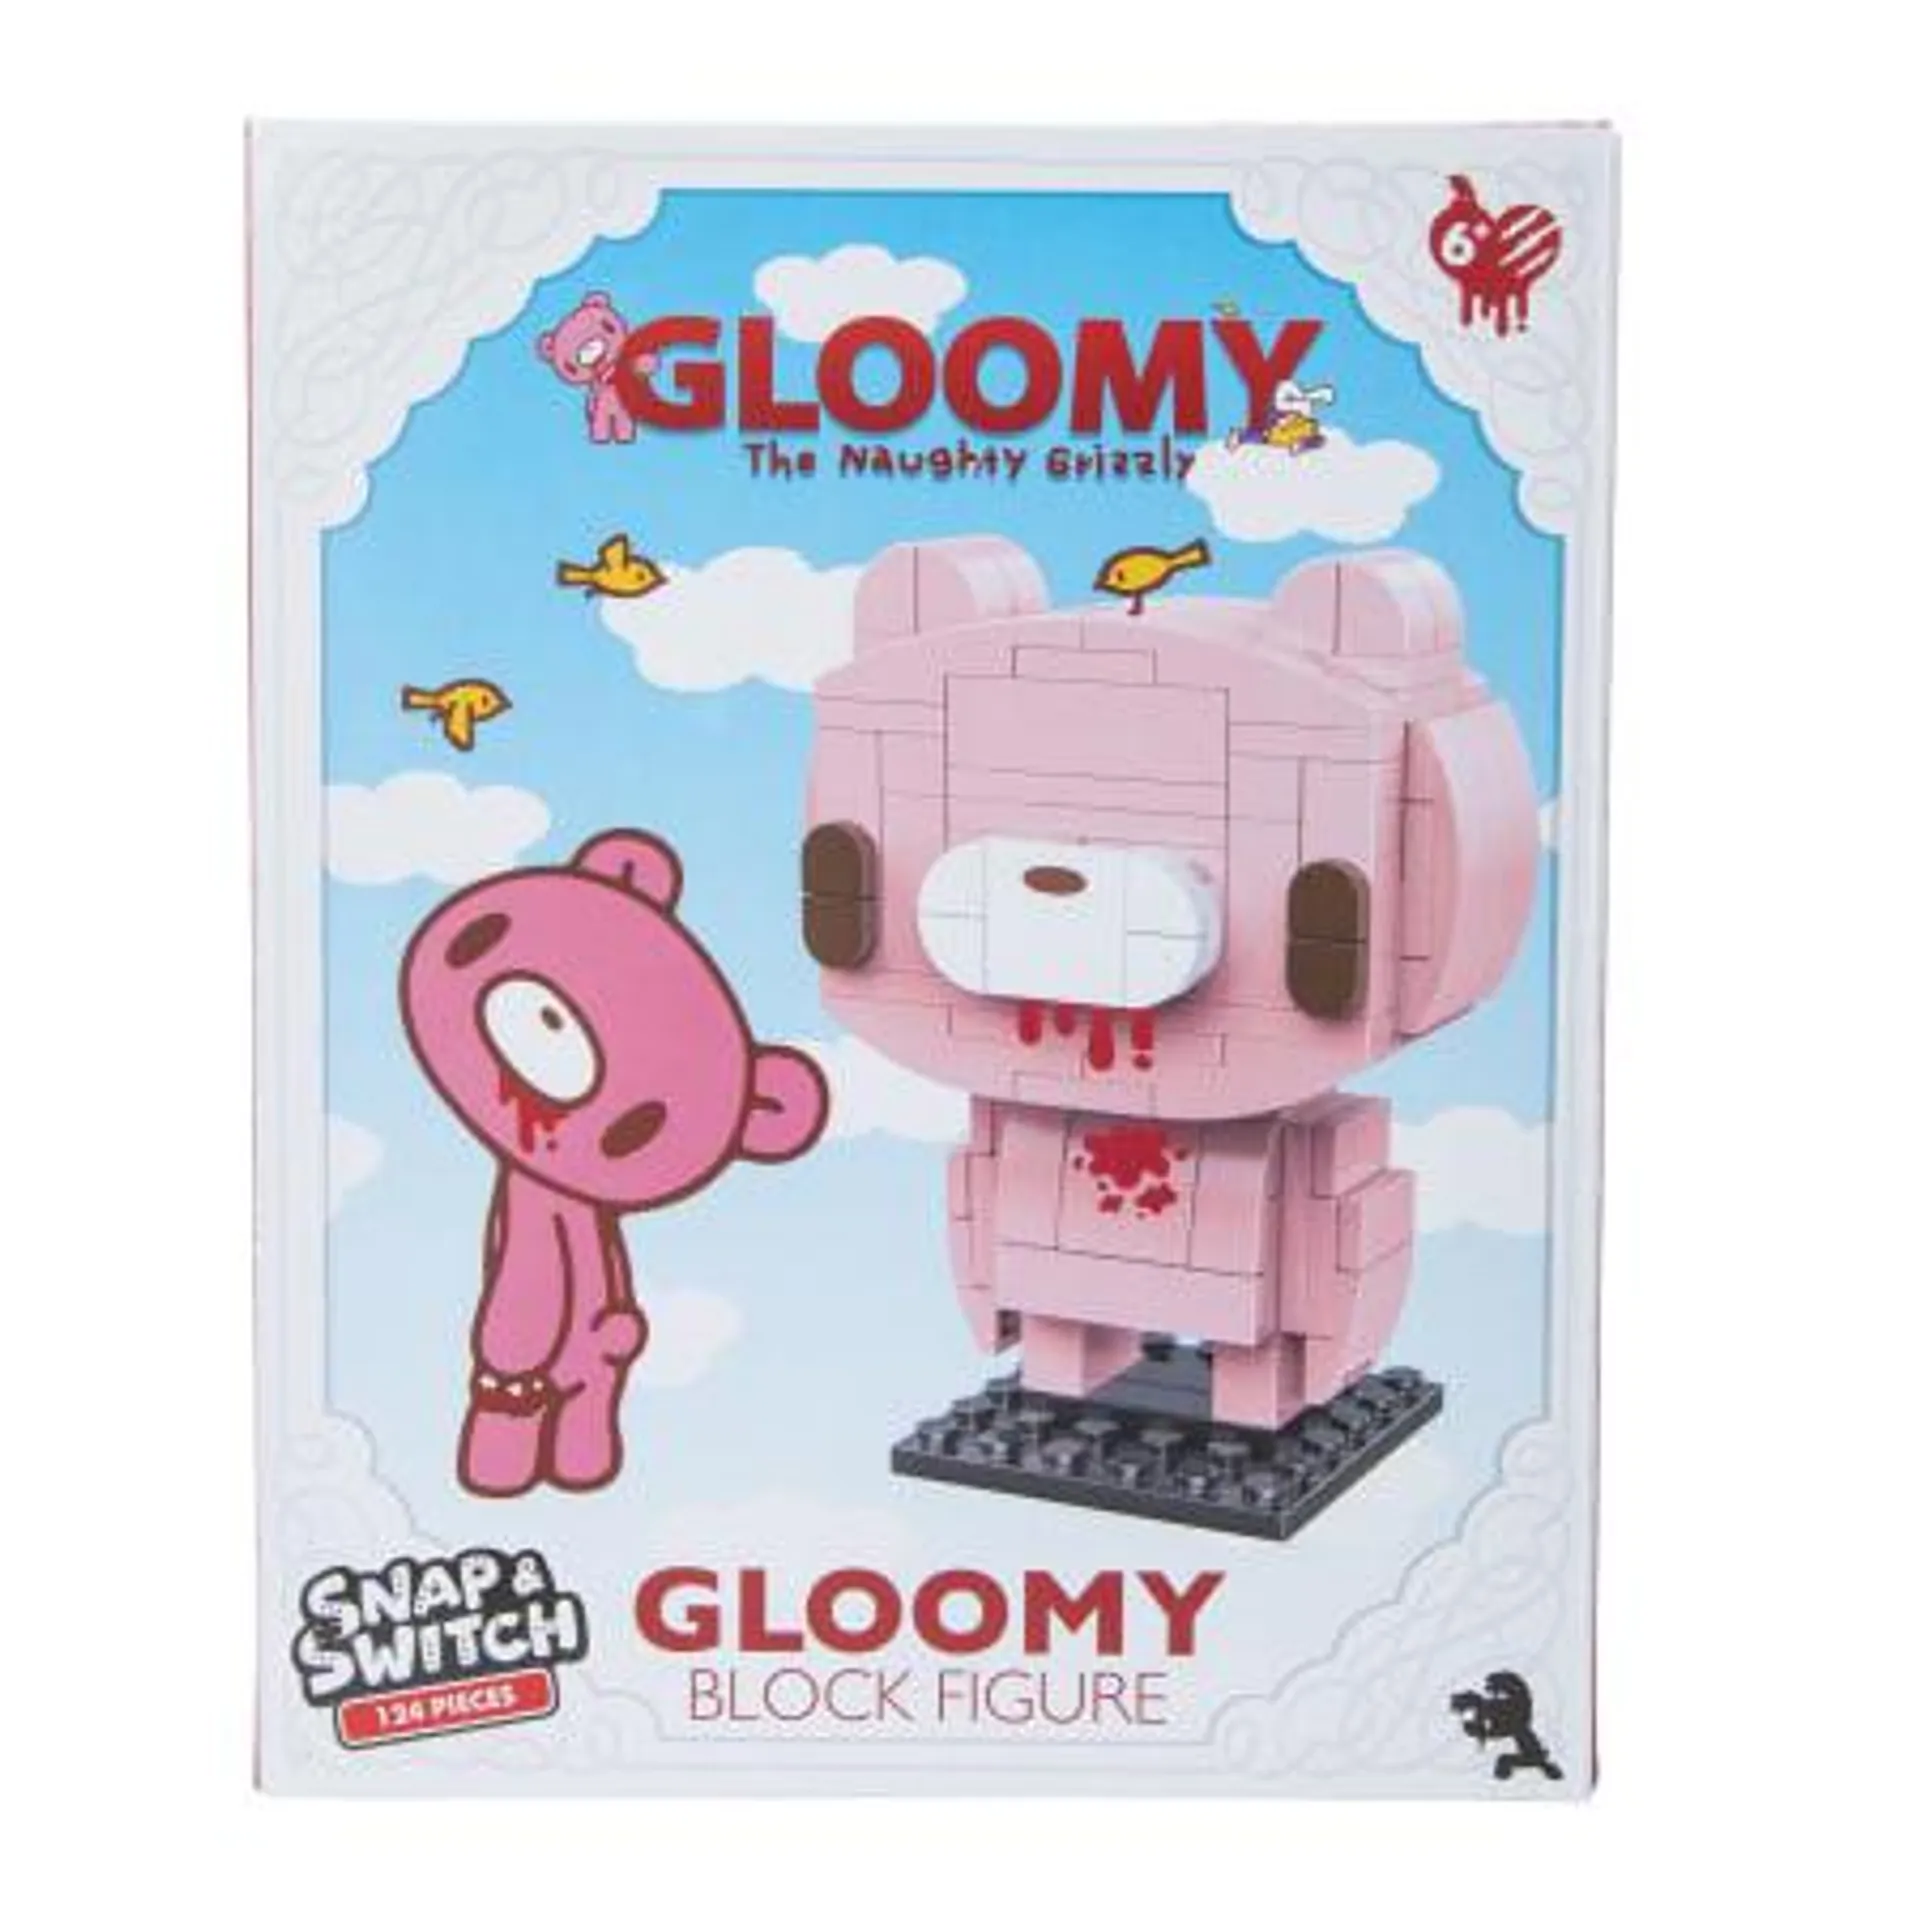 Gloomy The Naughty Grizzly® Block Figure